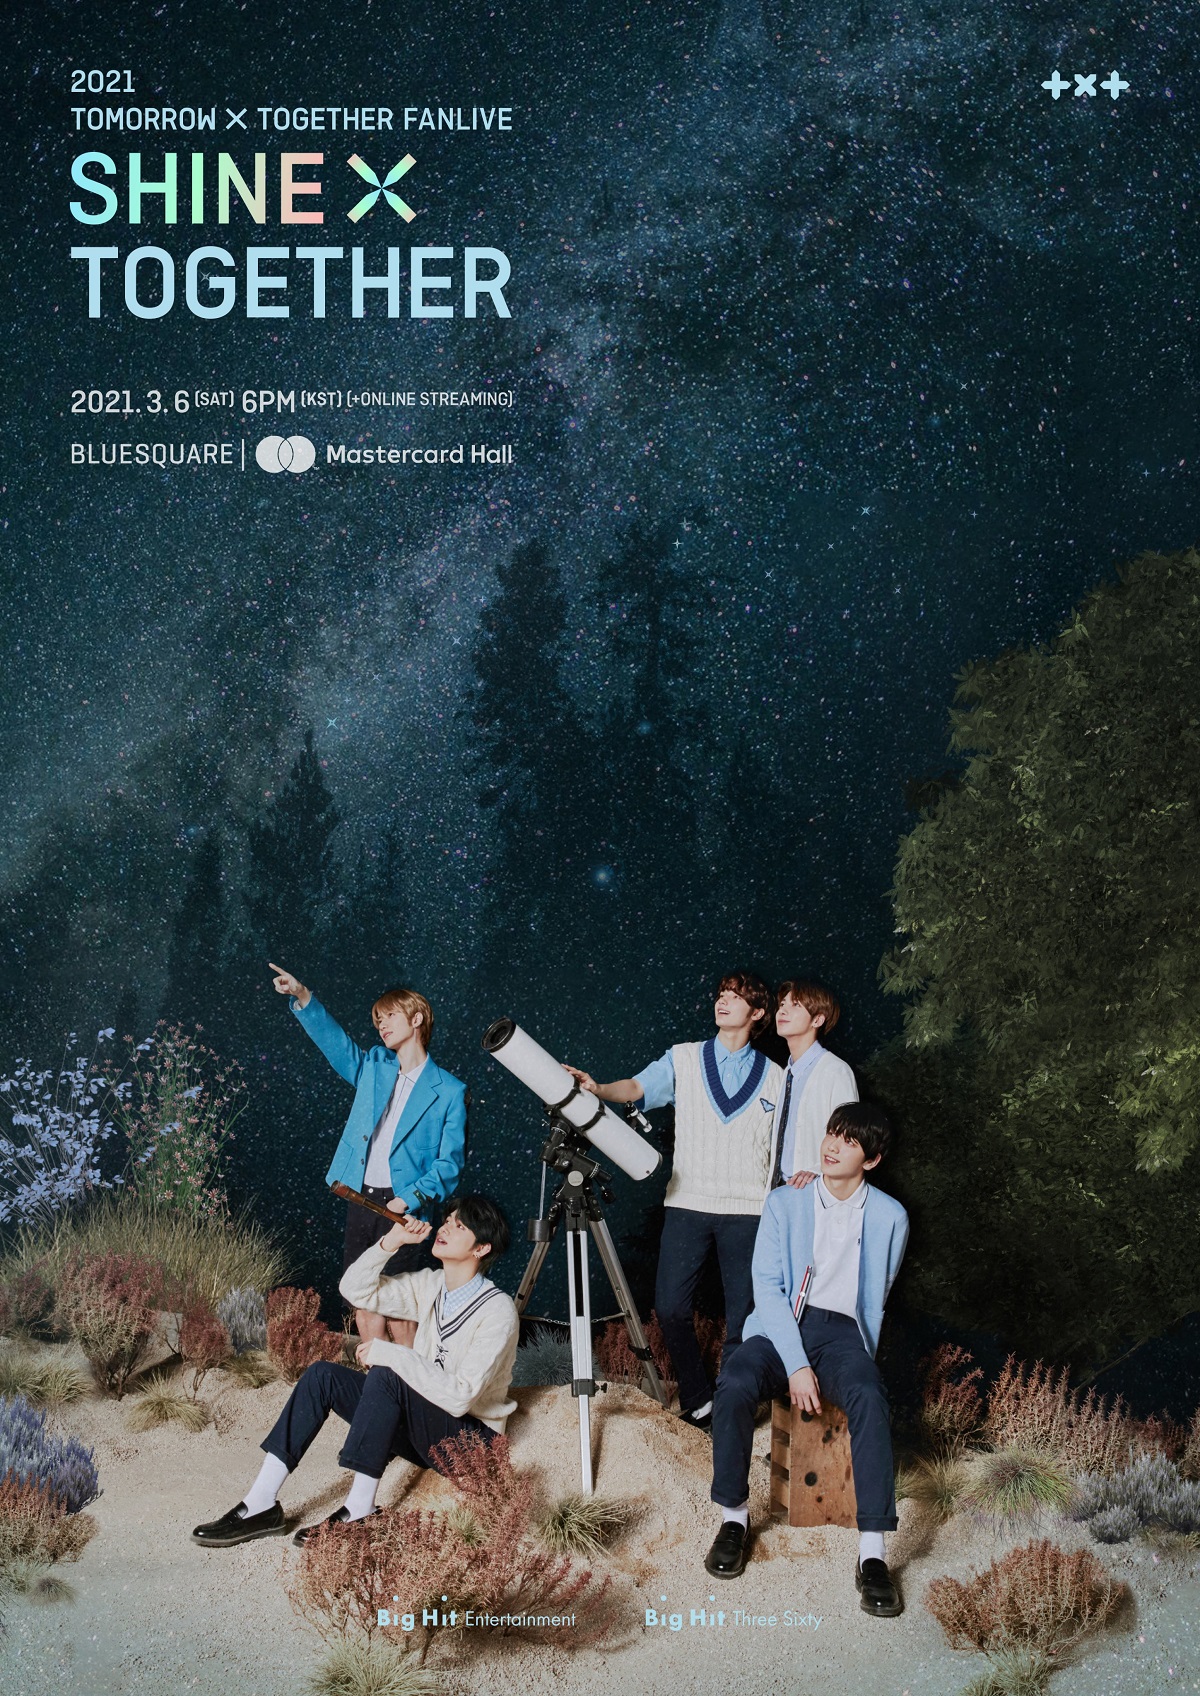 txt-to-hold-2nd-online-concert-2021-txt-fanlive-shine-x-together-on-march-6